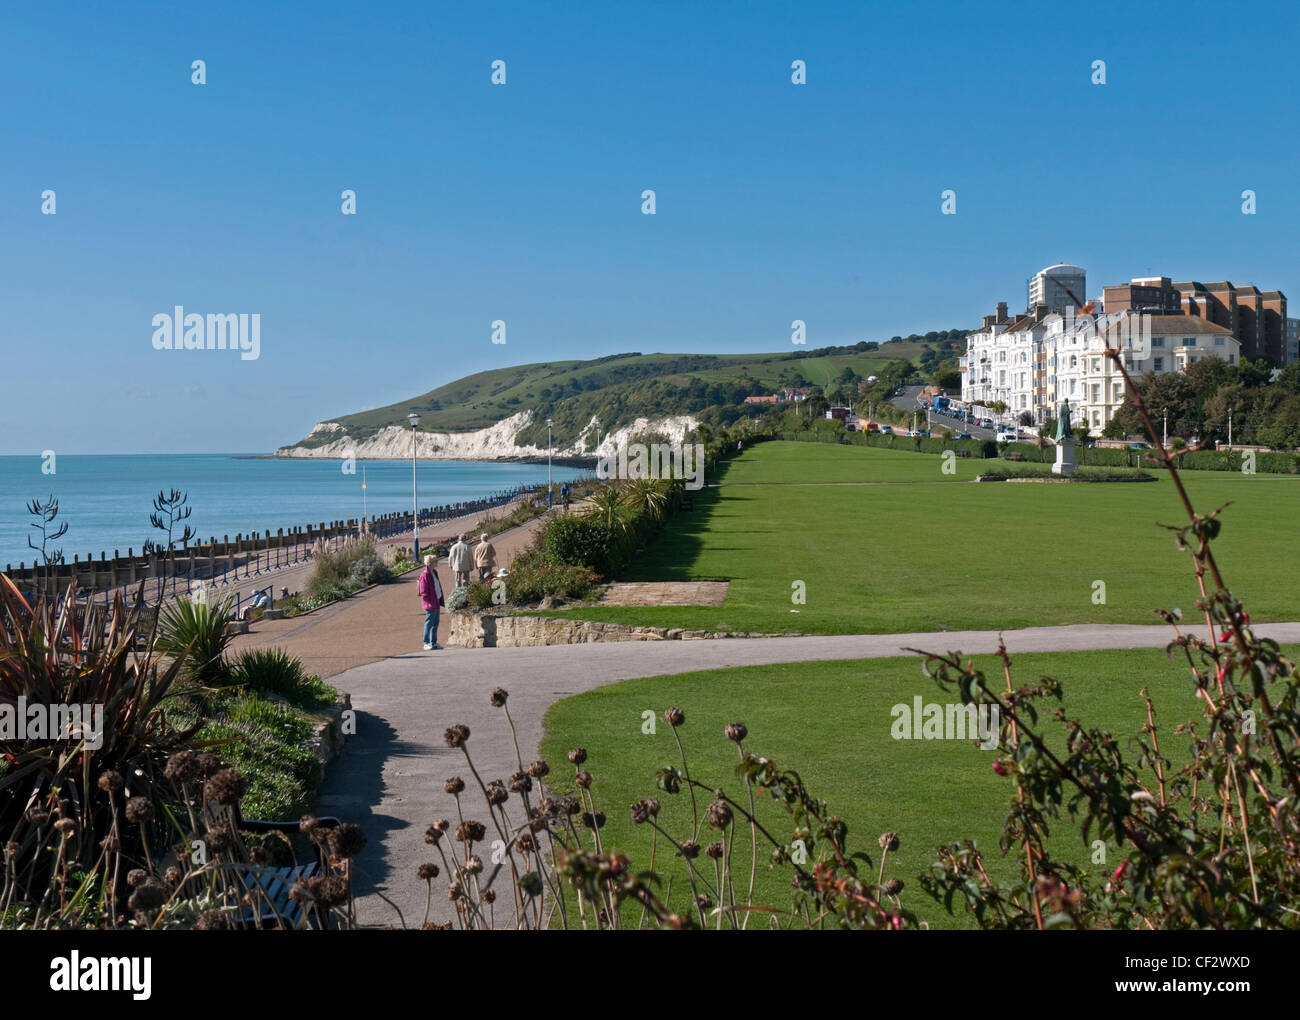 The Western Lawns along the seafront in Eastbourne, East Sussex, England Stock Photo